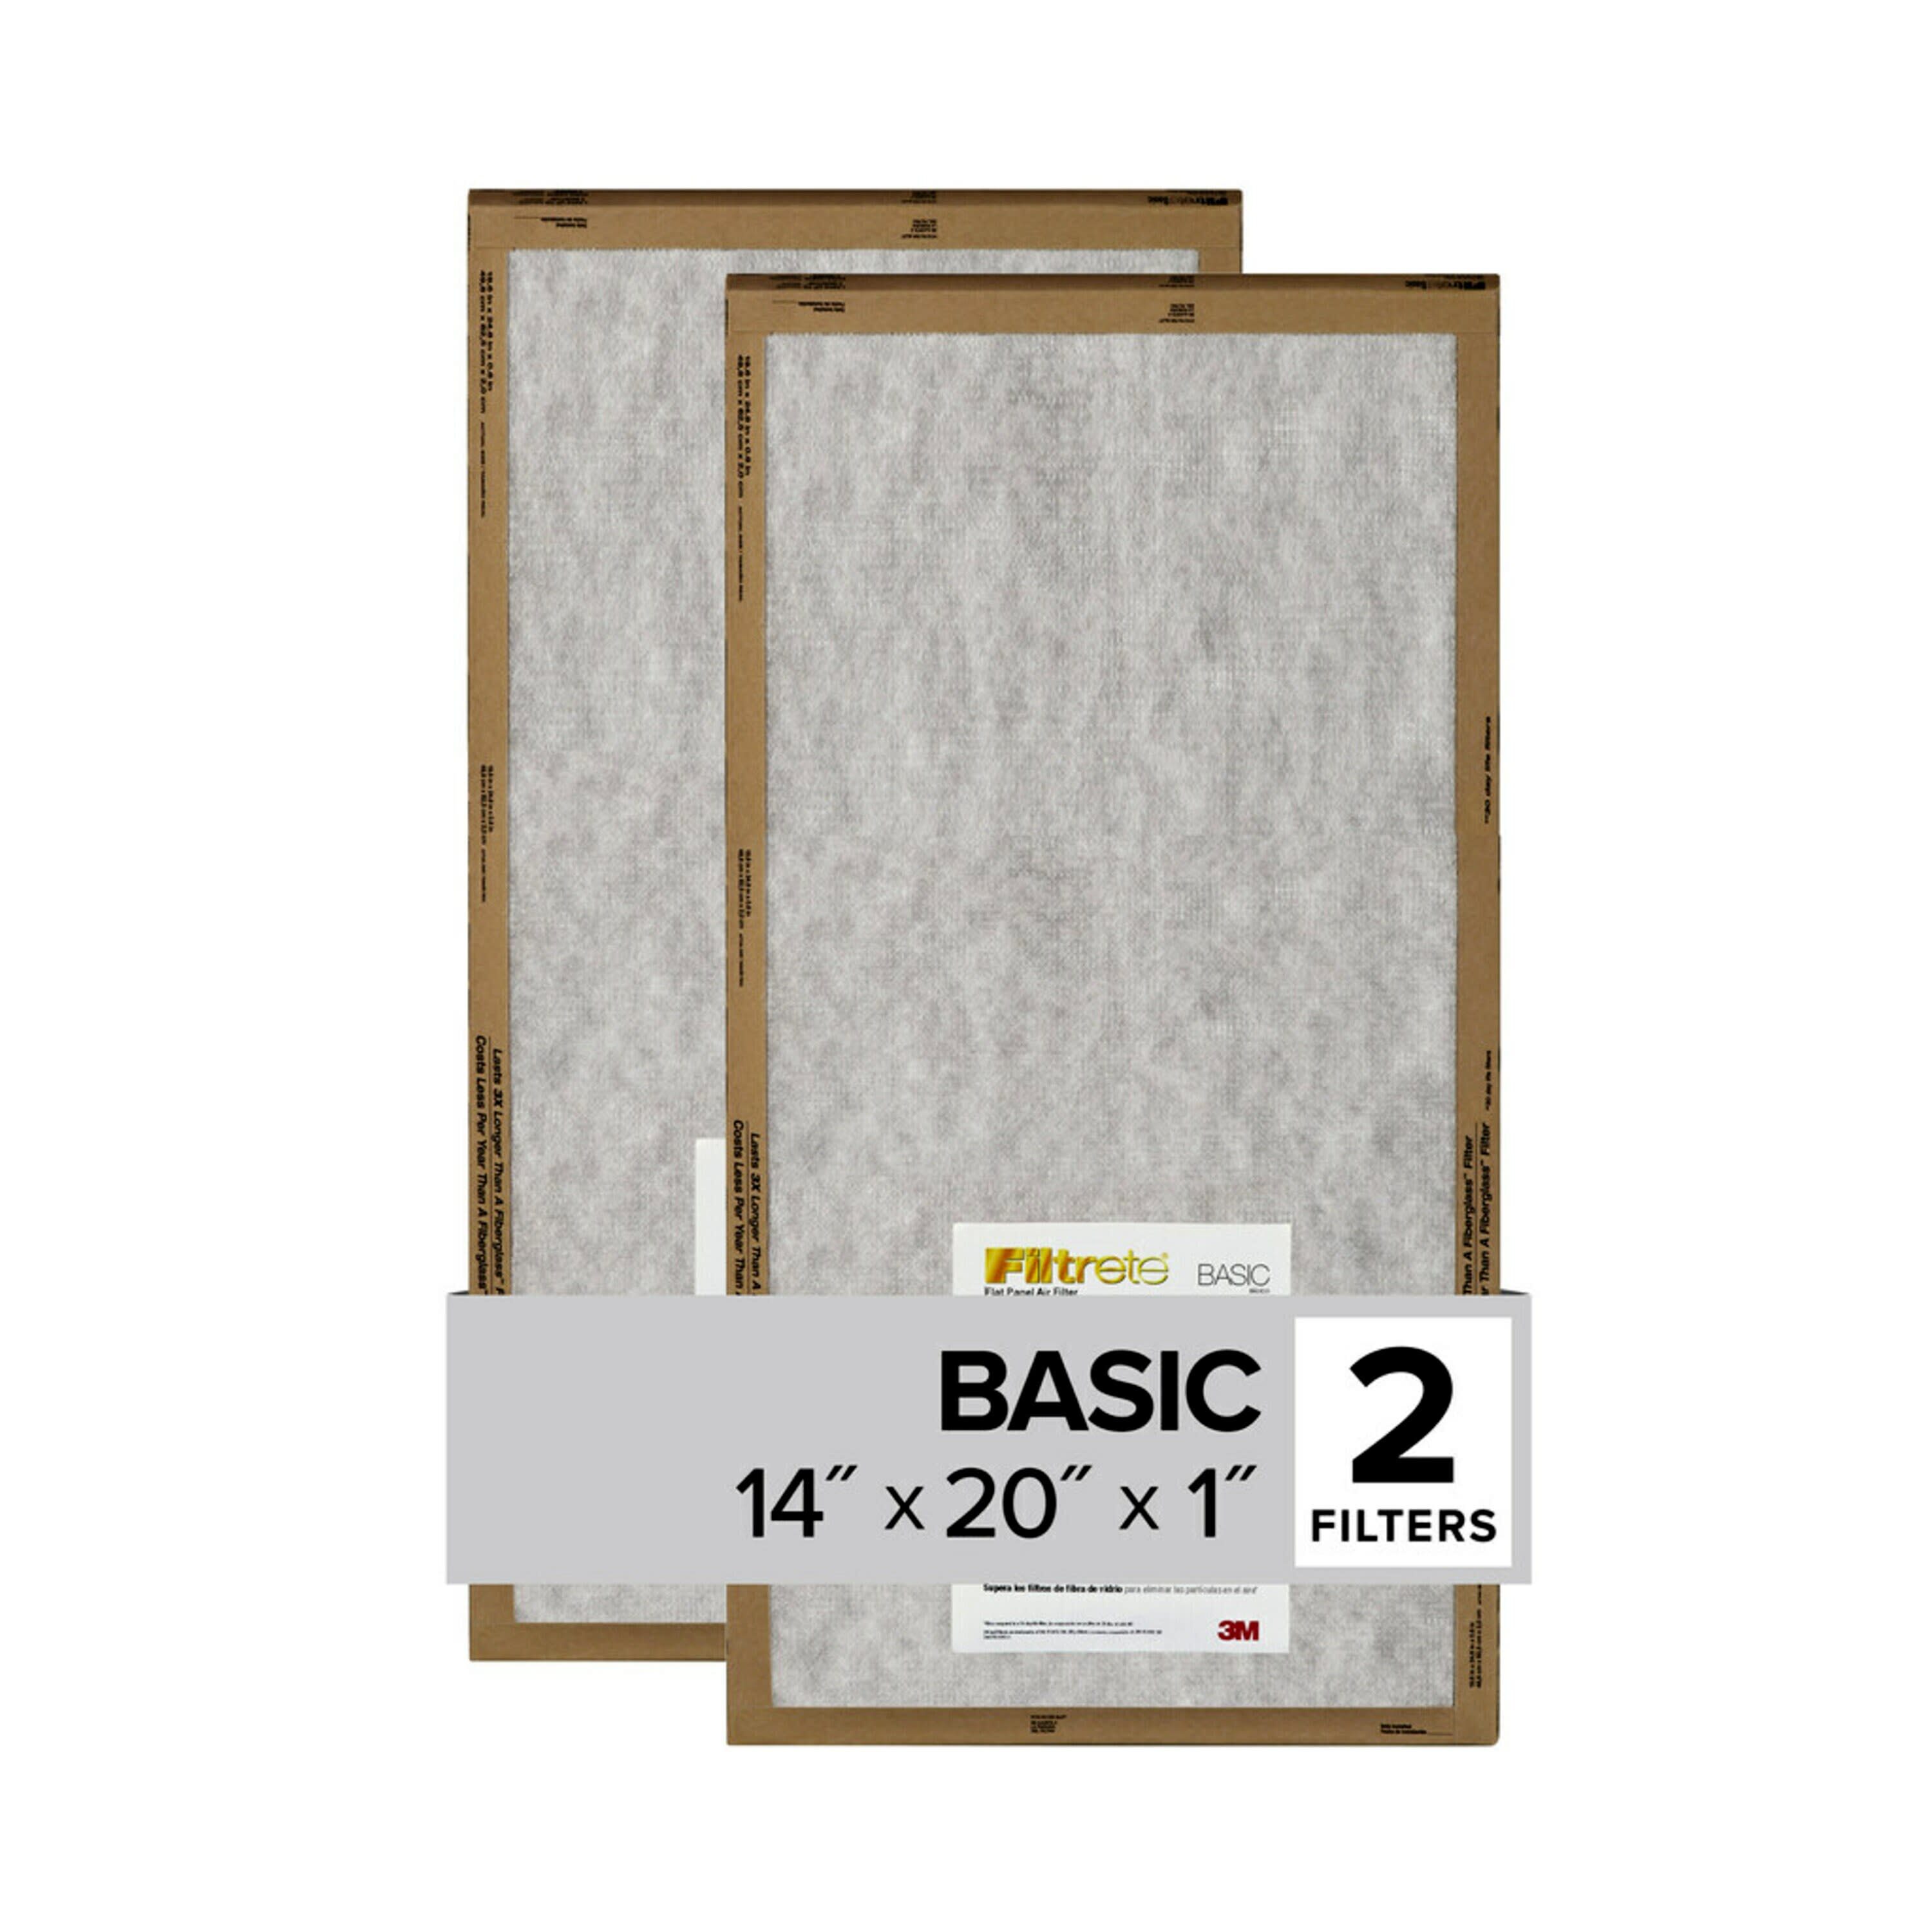 Series 55 Polyester Intake Filter Panels – (Carton quantity varies) –  Finish Systems